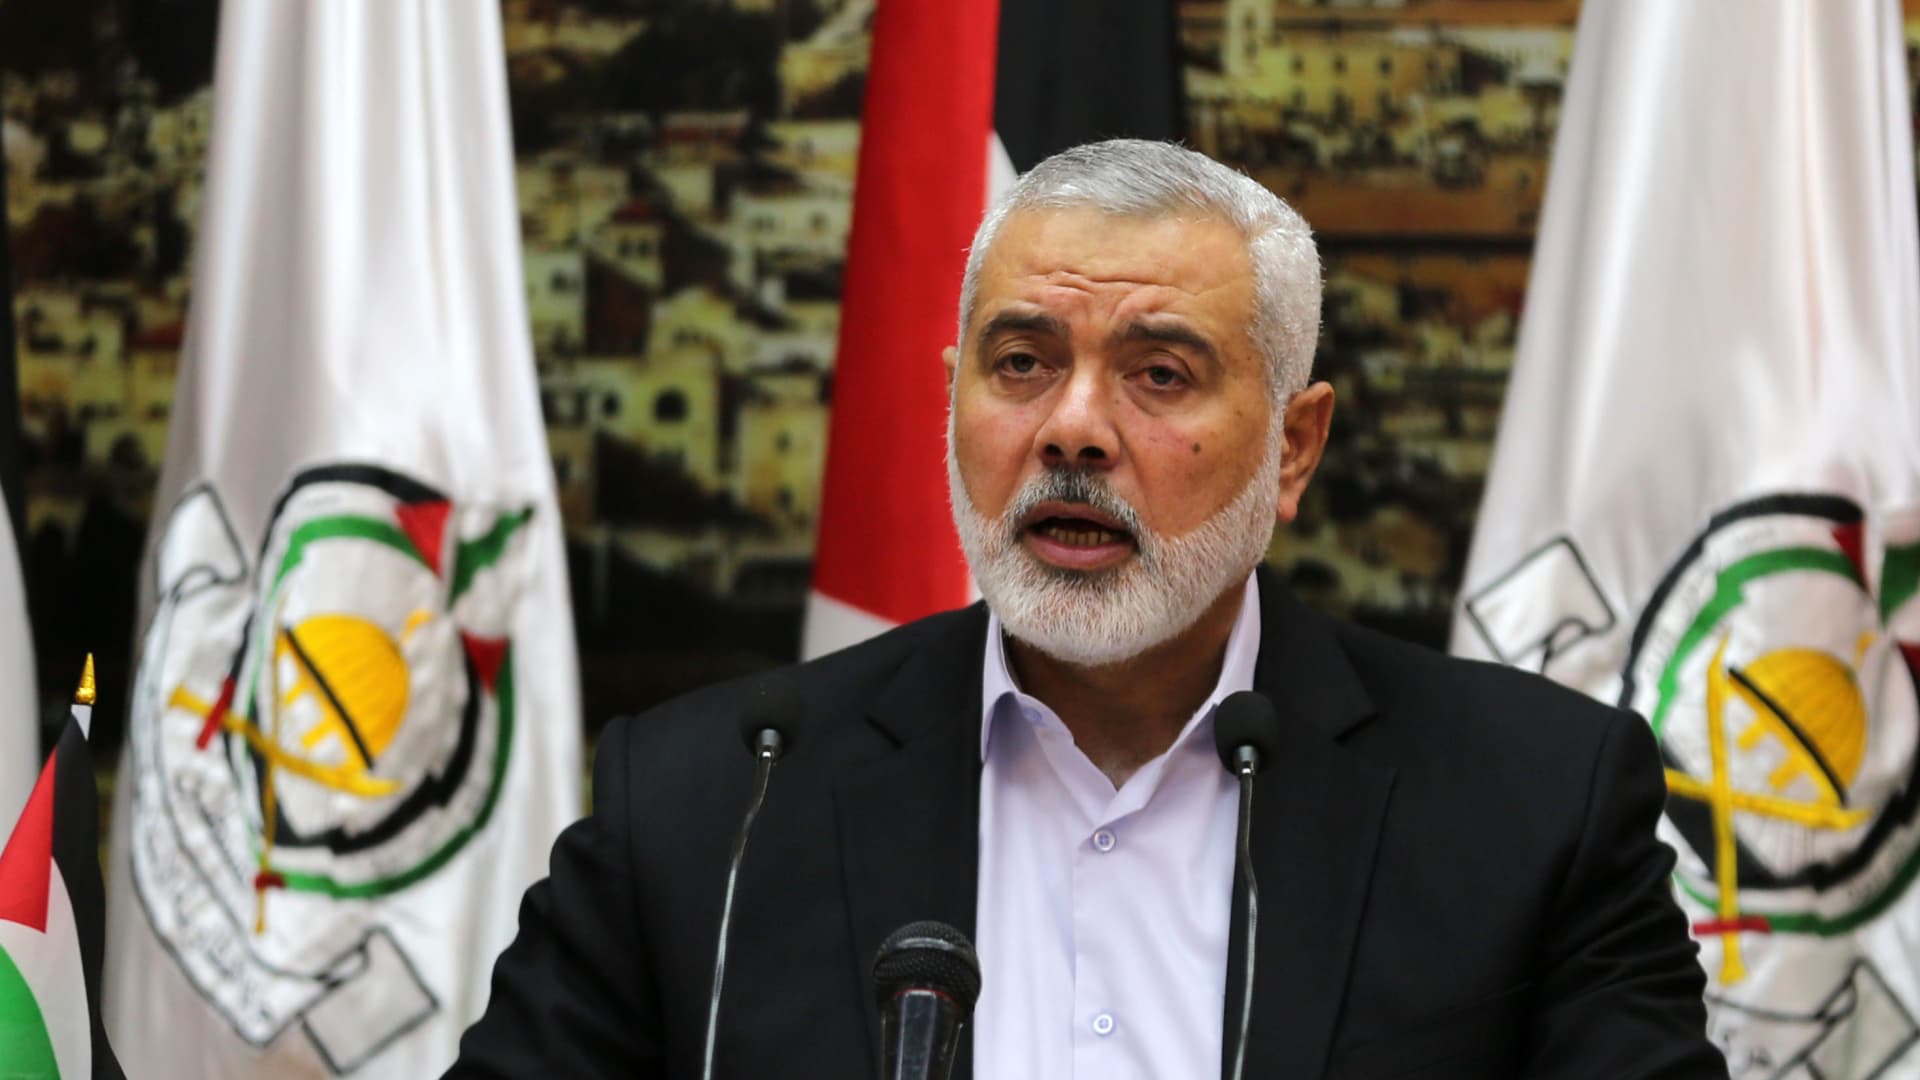 Ismail Haniya, the Head of the Palestinian Islamist movement Hamas, delivers a speech in Gaza City on April 30, 2018. (Photo by Momen Faiz/NurPhoto via Getty Images)